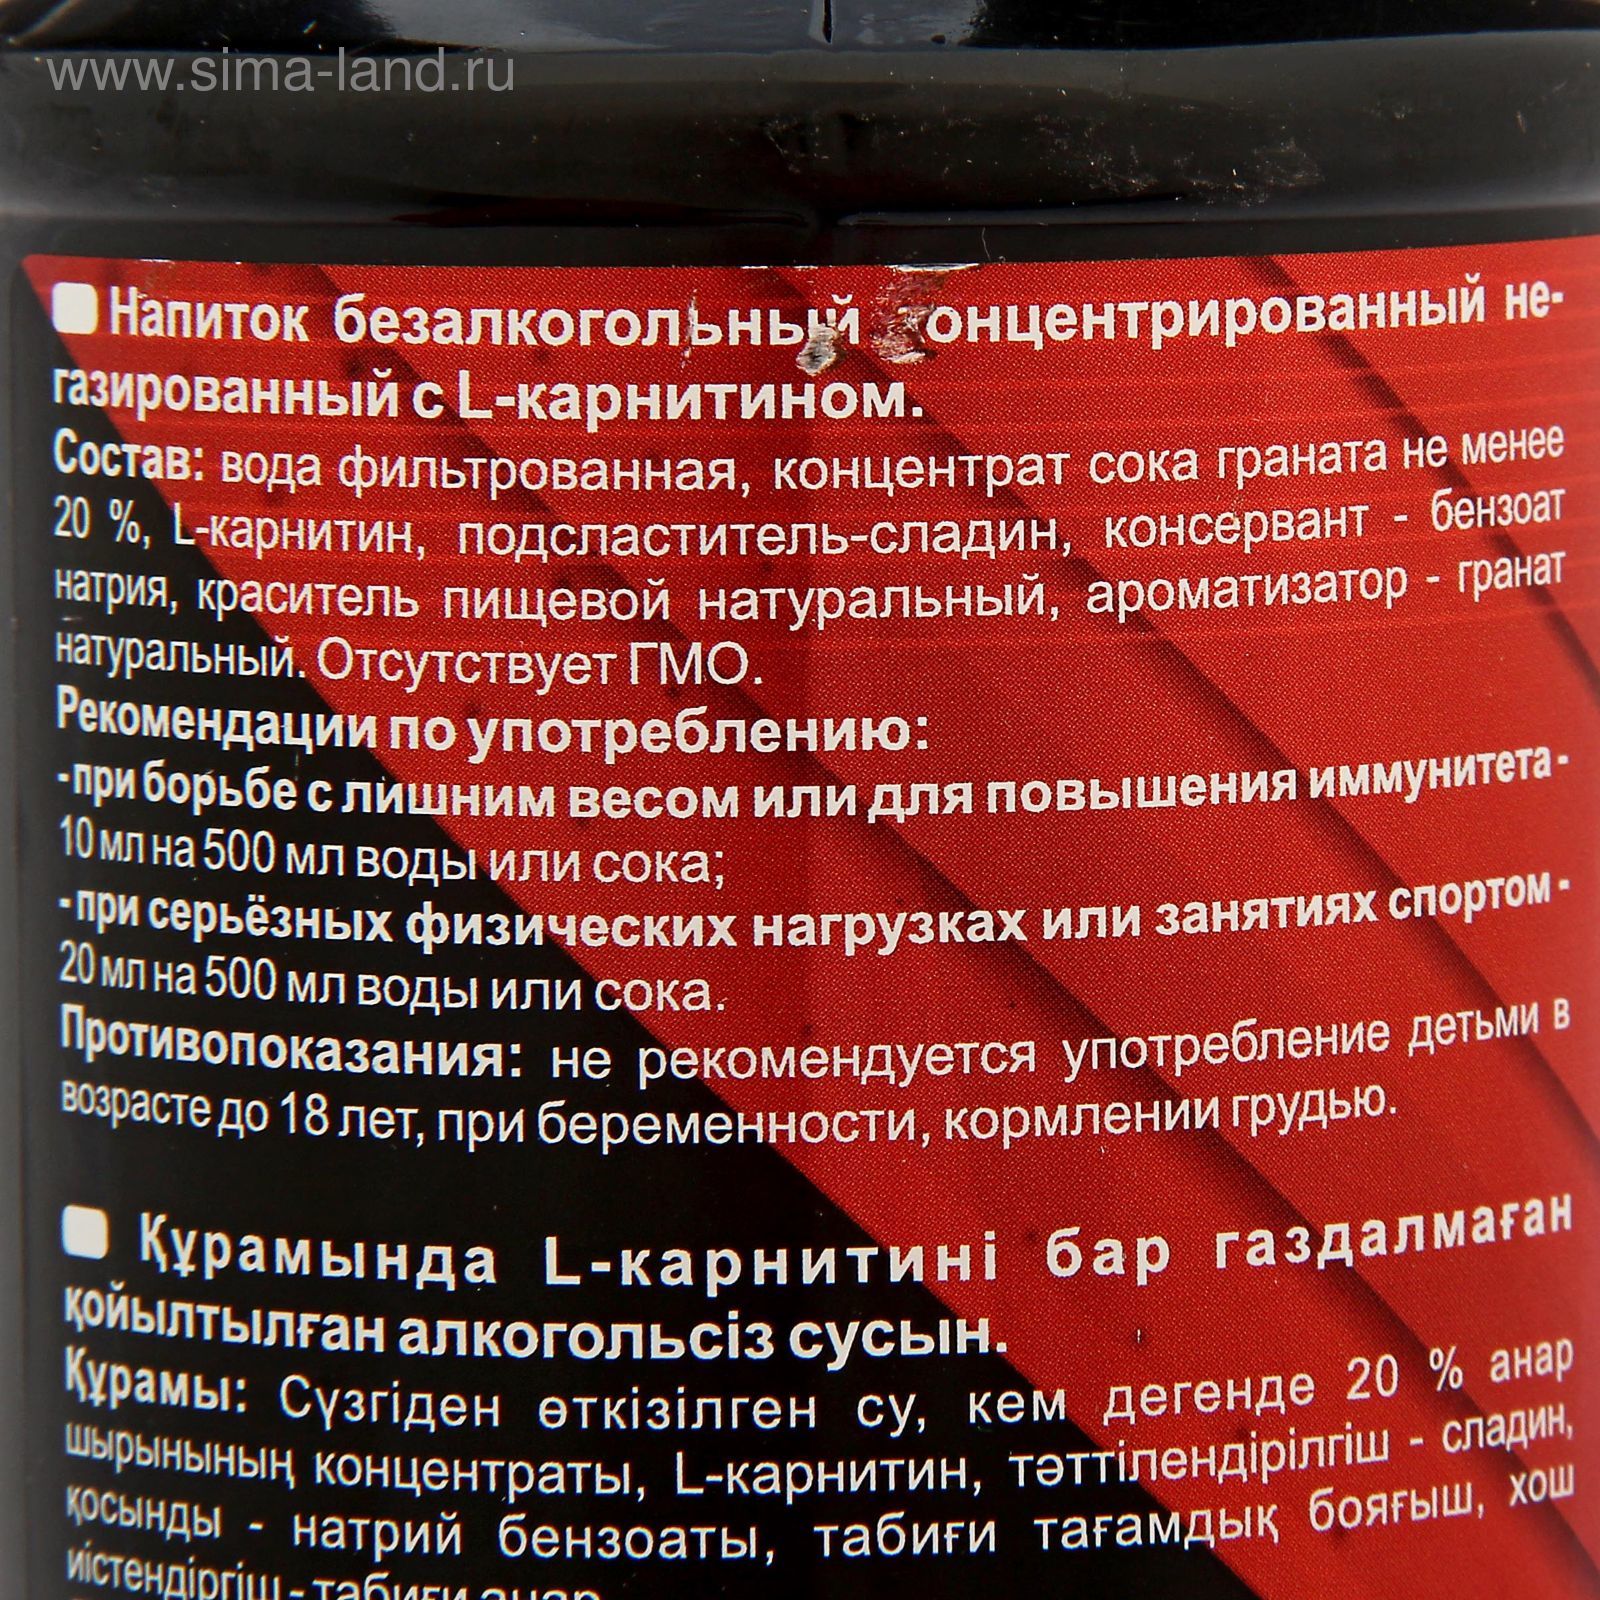 L-Карнитин SportLine Concentrate 150.000mg 500ml (Гранат)